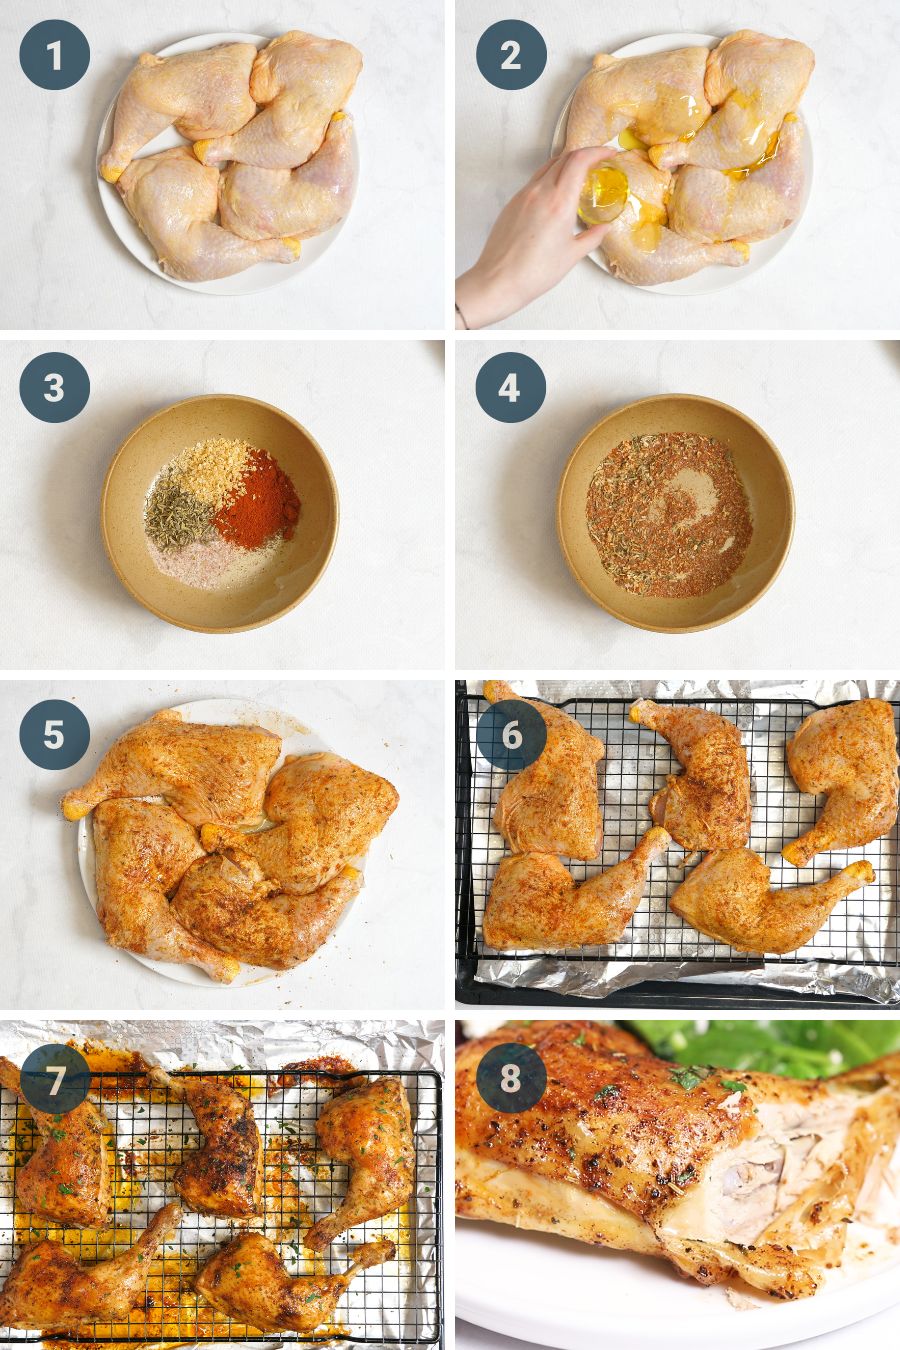 Crispy Baked Chicken Leg Quarters step by step instructions